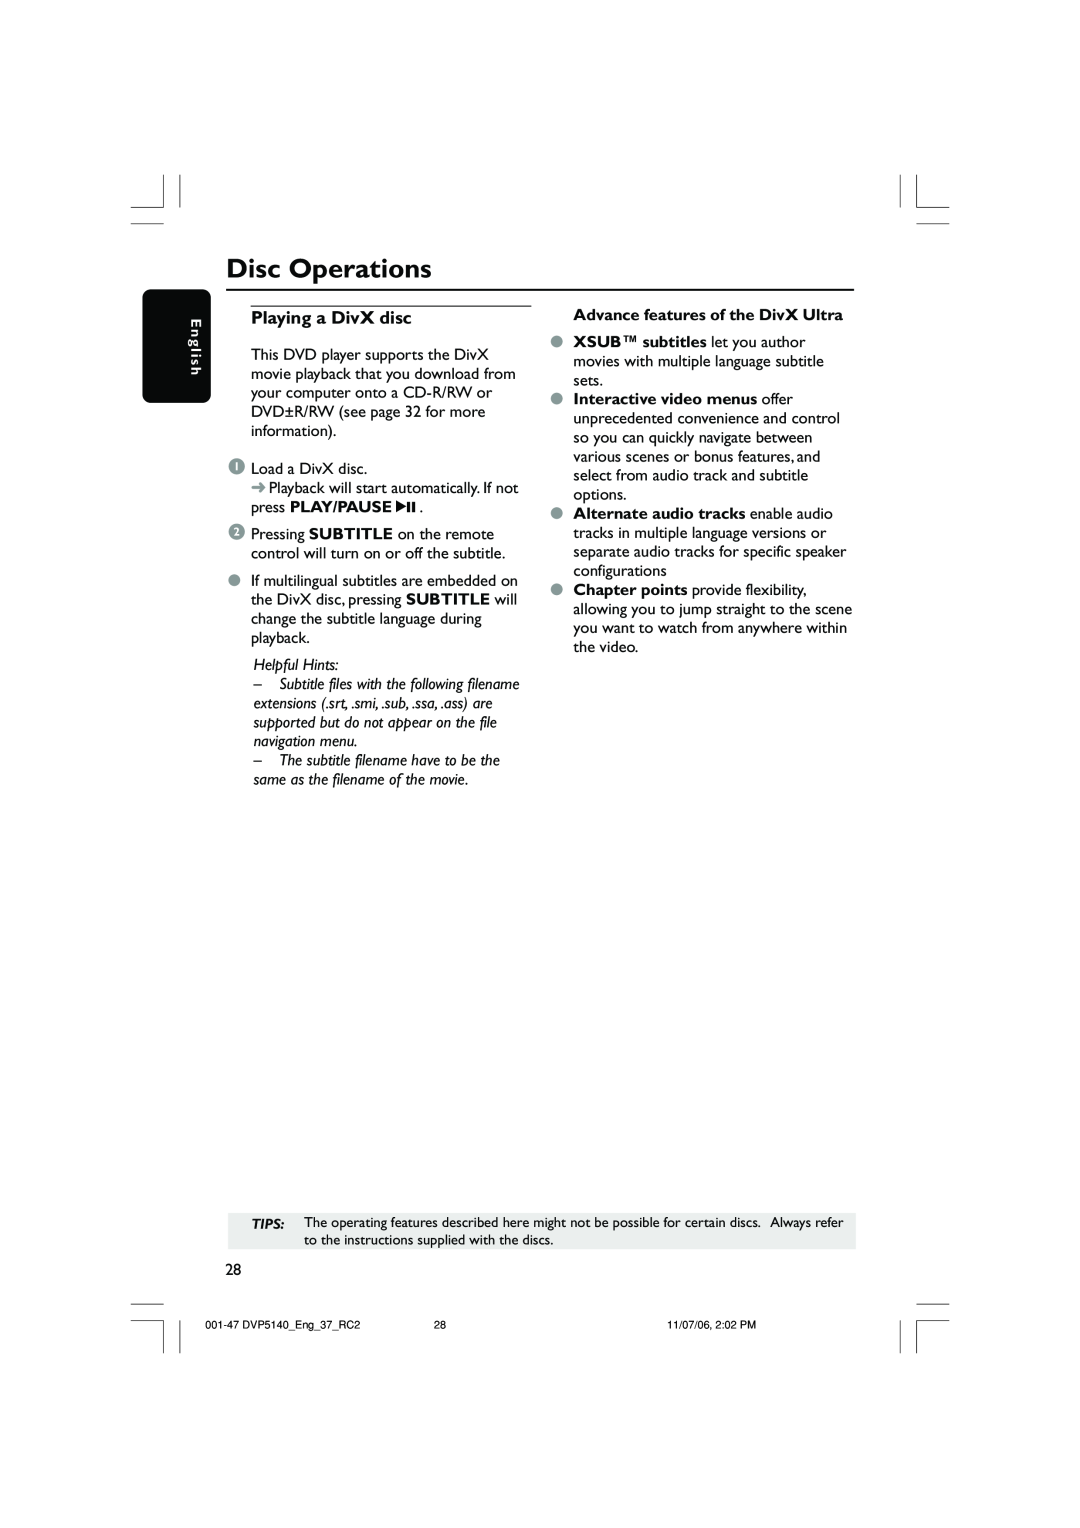 Philips DVP5140 user manual Playing a DivX disc, Disc Operations, Advance features of the DivX Ultra, Helpful Hints 